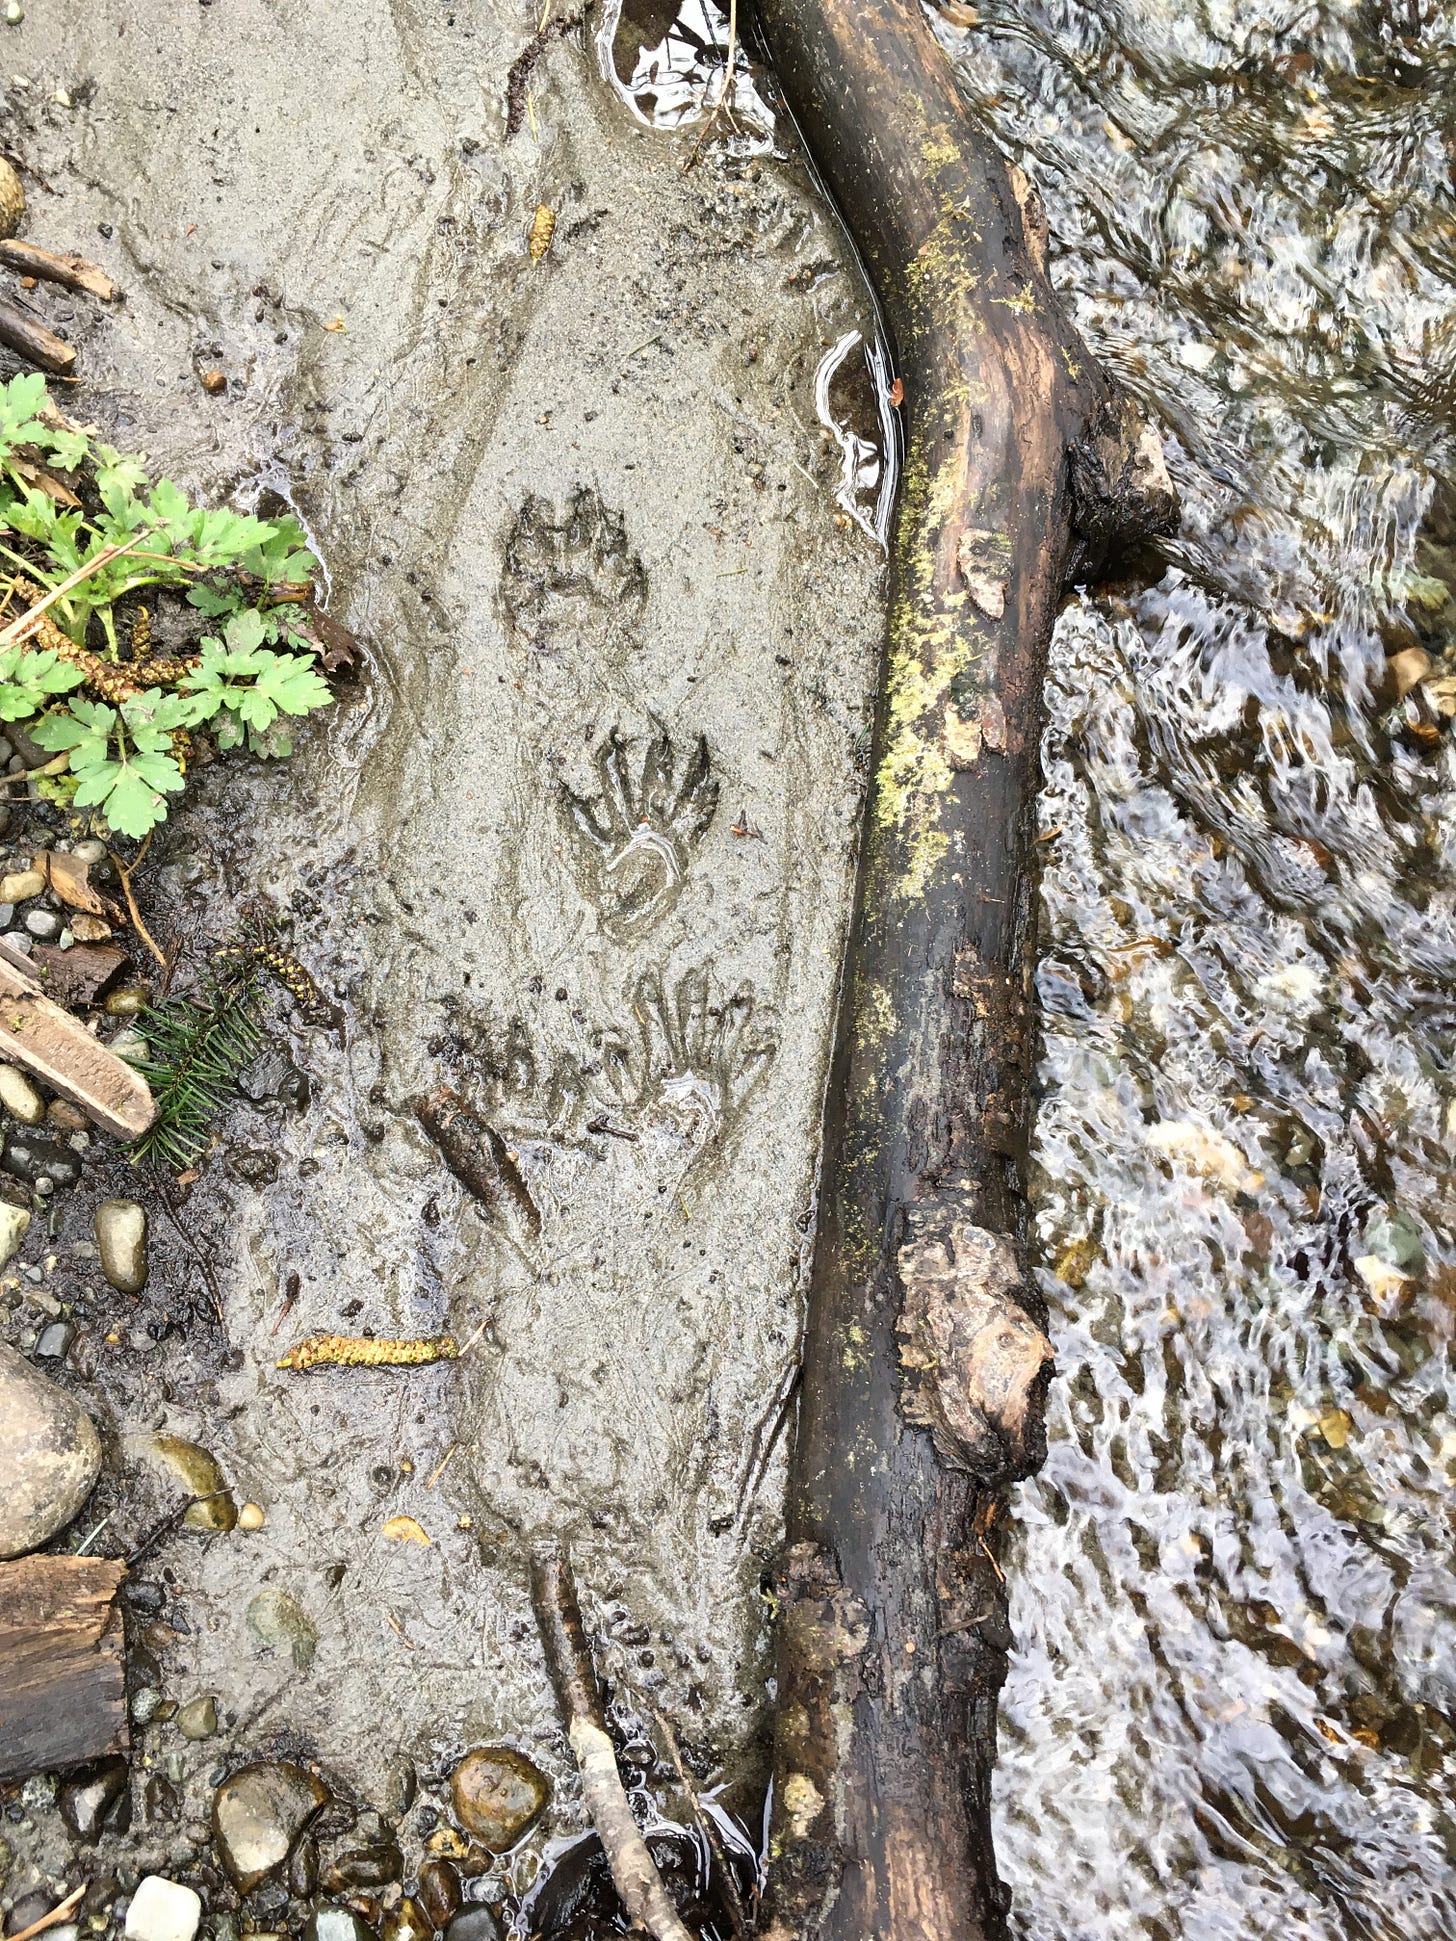 on the left side of image some green plant though mostly wet sand with four raccoon prints set, then a branch separating the sand from, on the right side, clear flowing water with rocks at the shallow bottom.